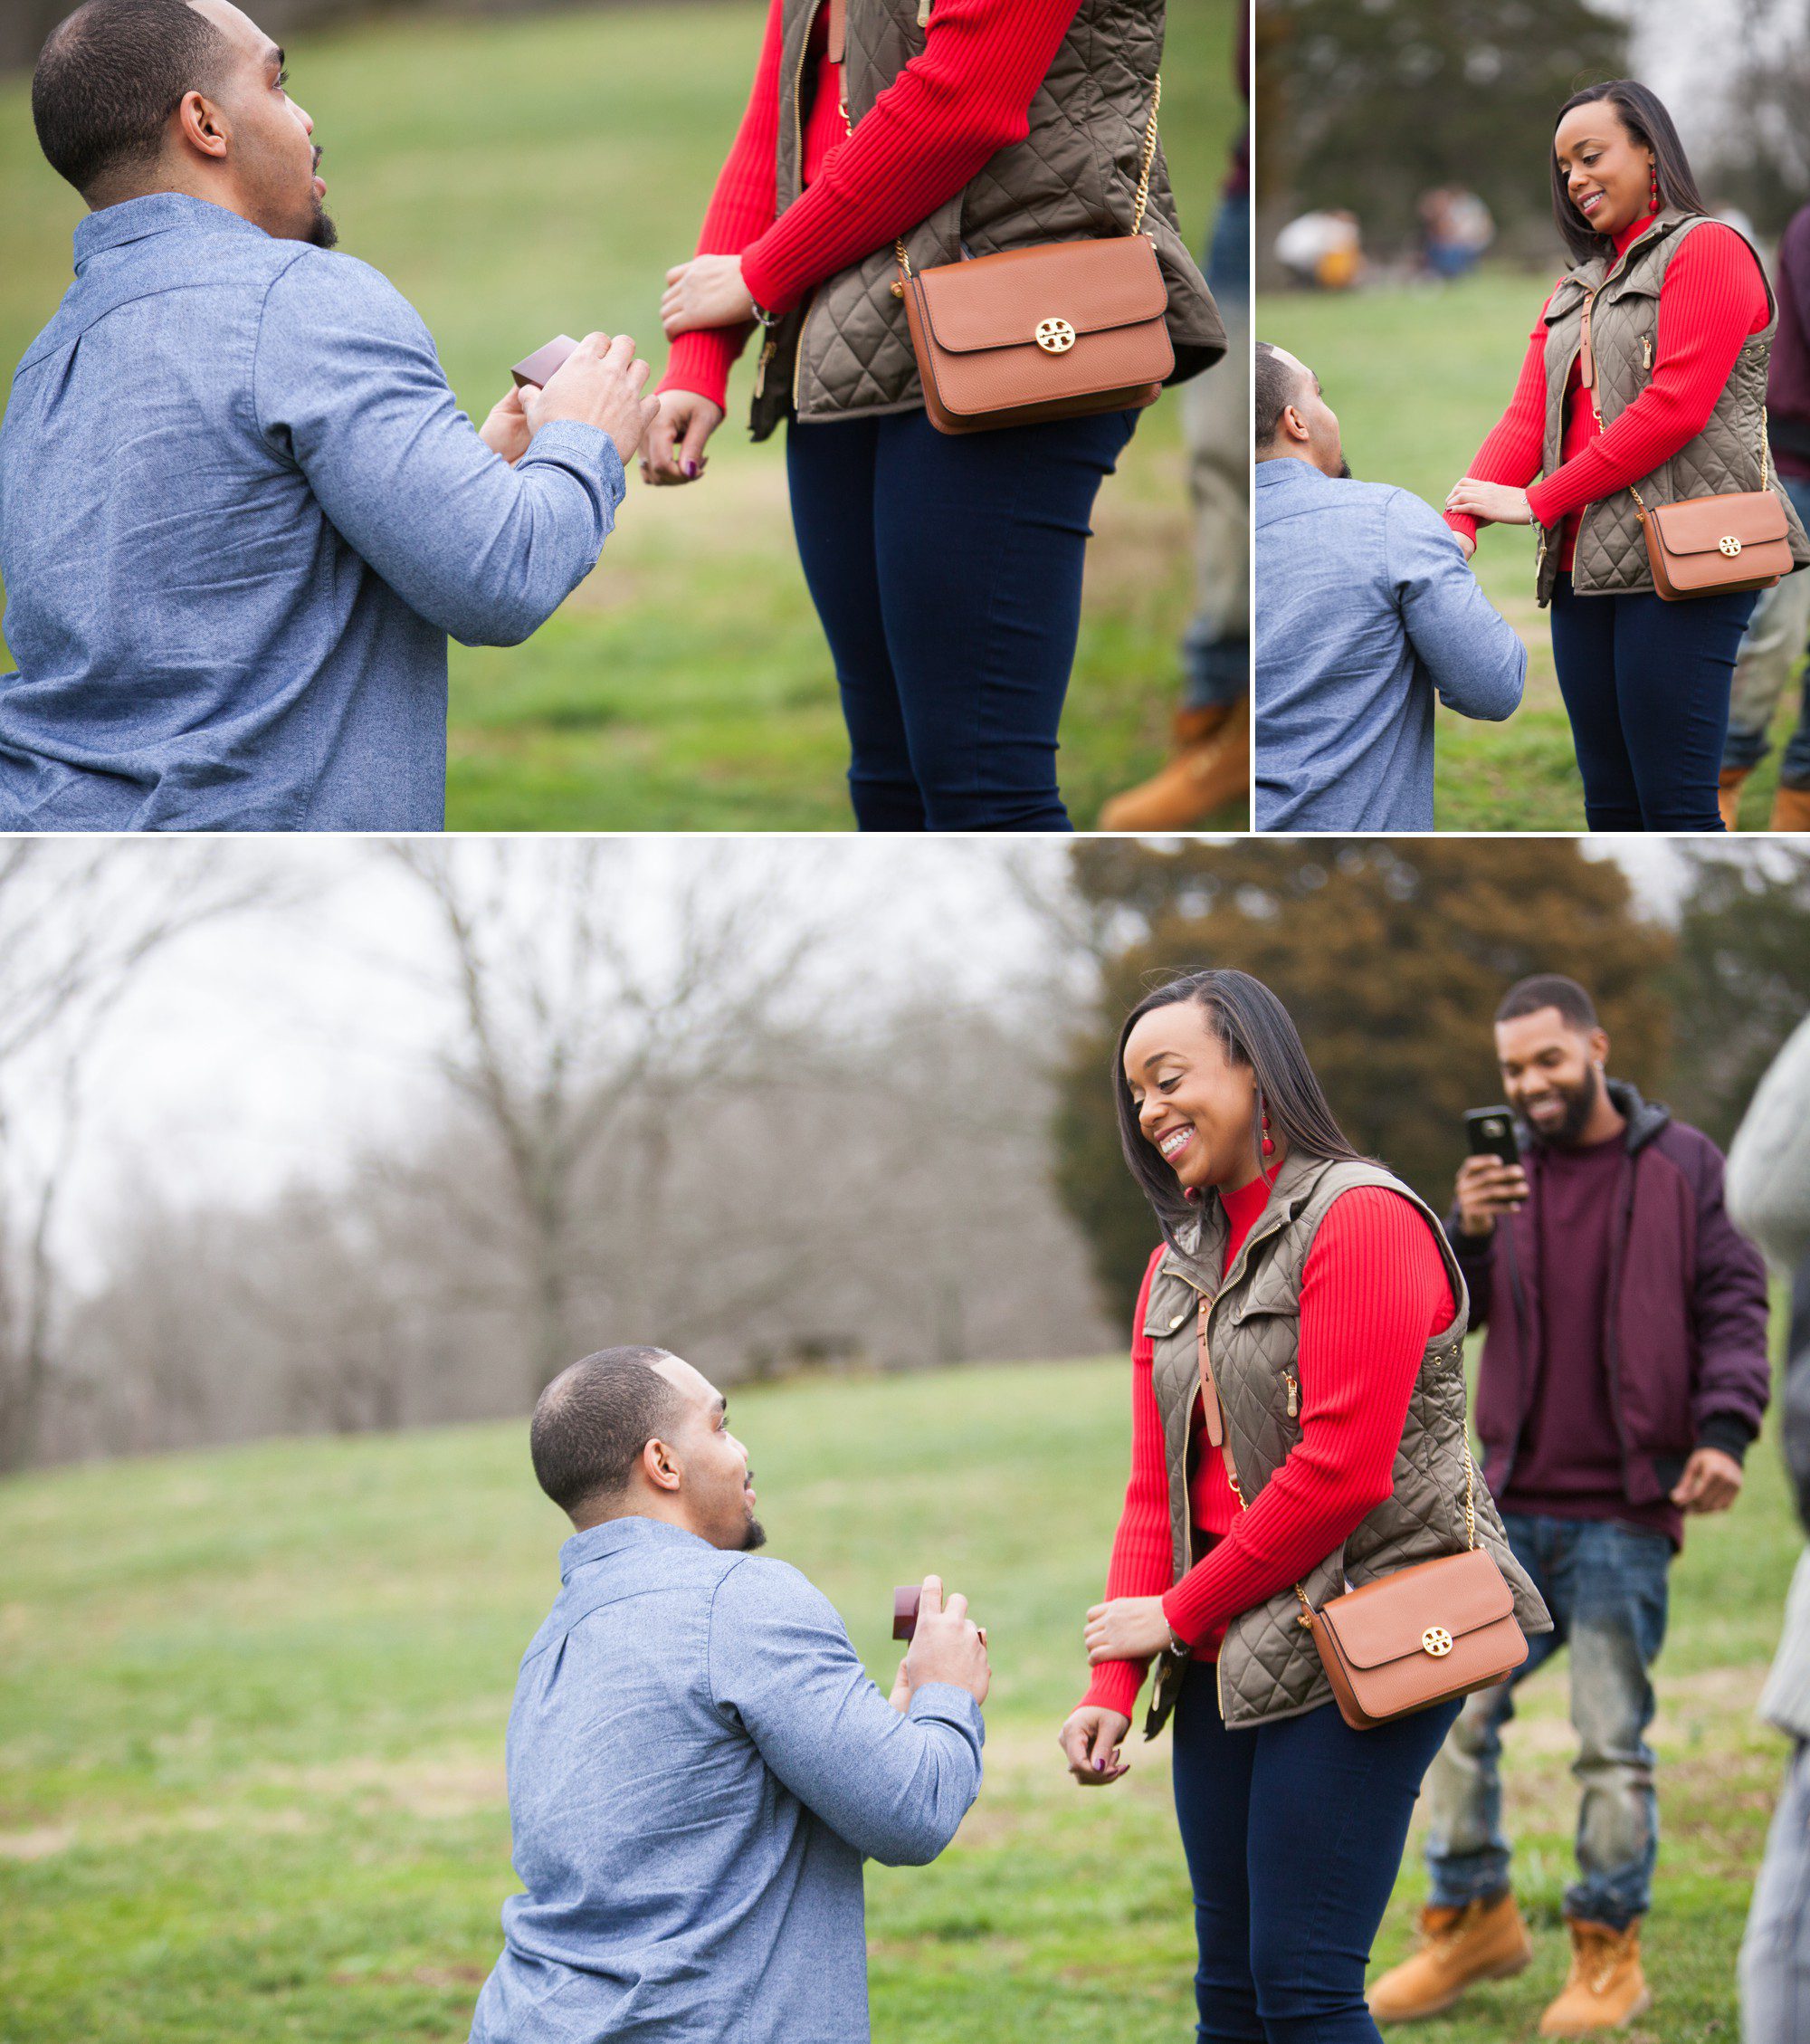 Nick proposing on one knee. From Nick and Tiffany's surprise proposal at Arrington Vineyards just outside of Nashville TN 